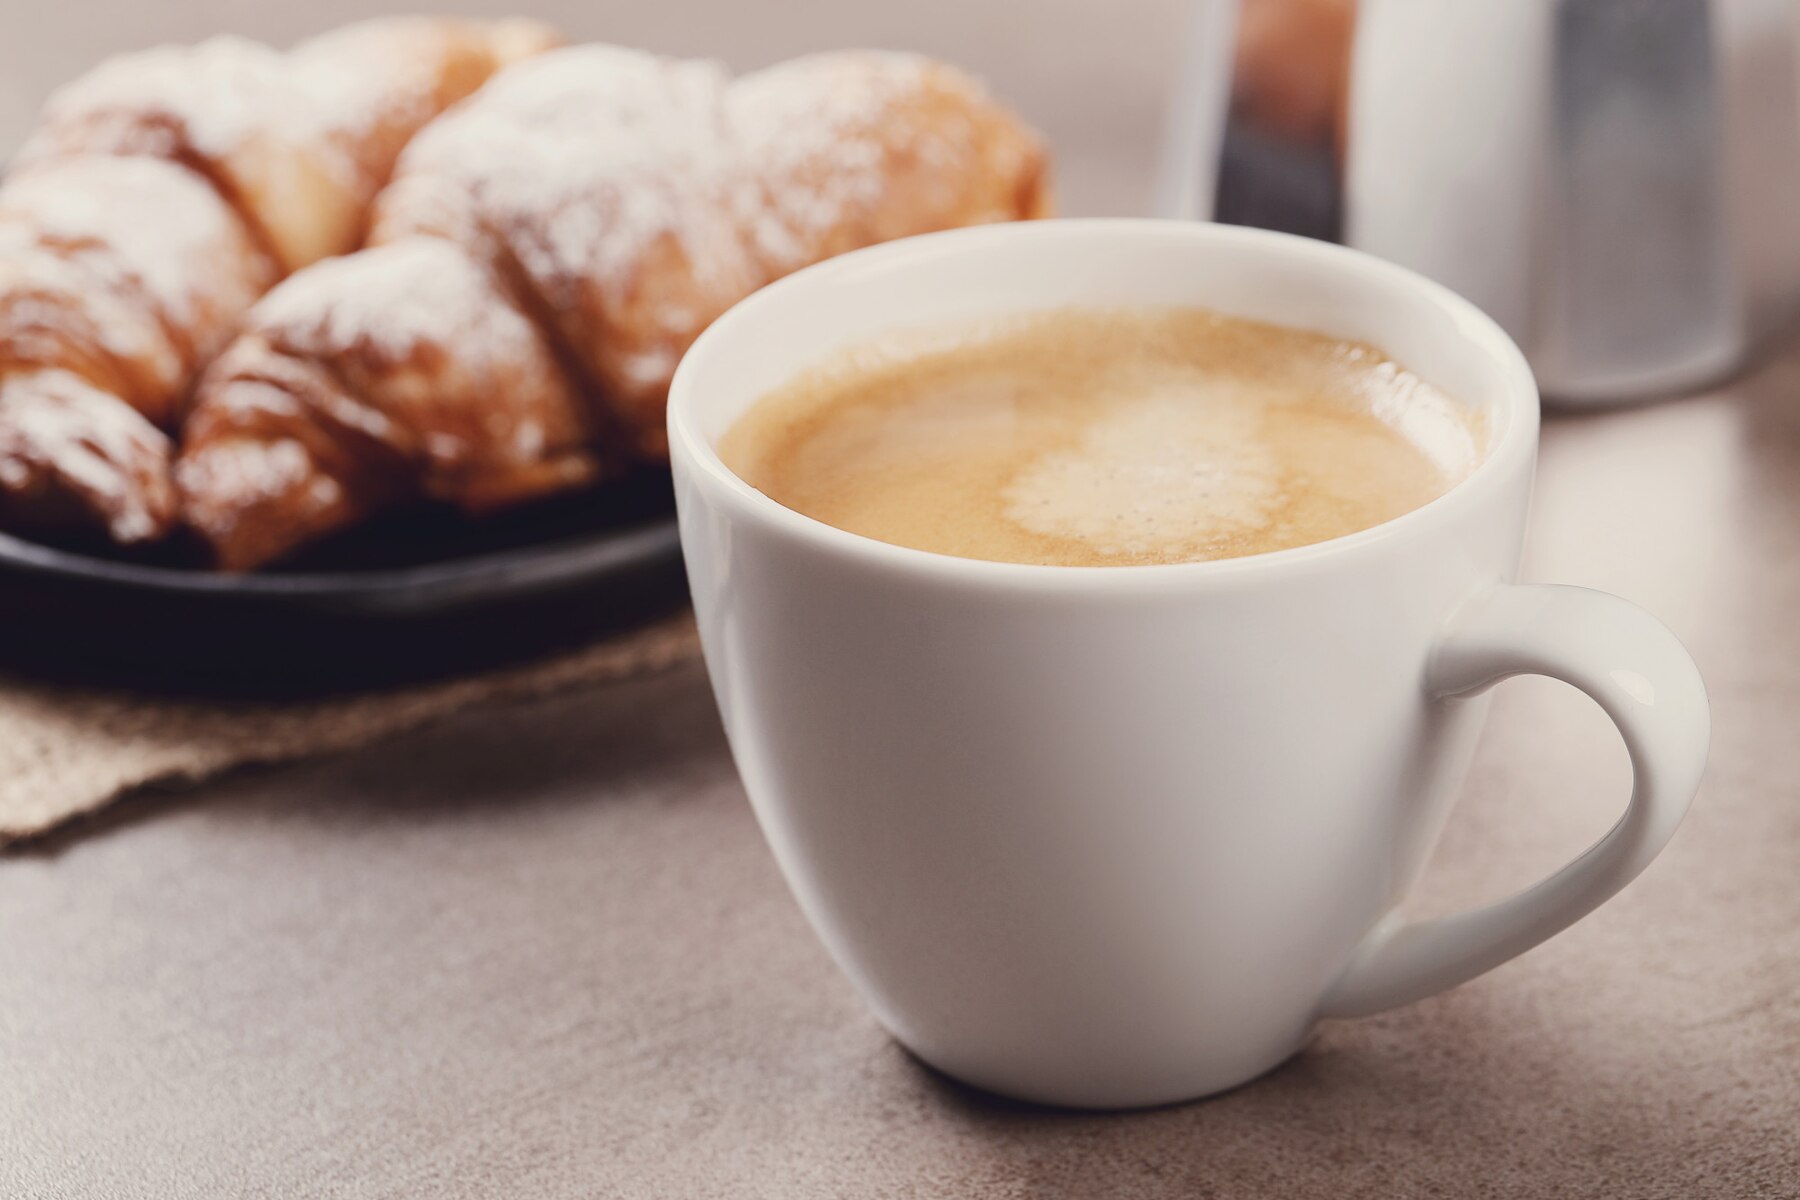 croissants-with-coffee-cup_144627-34791.jpg